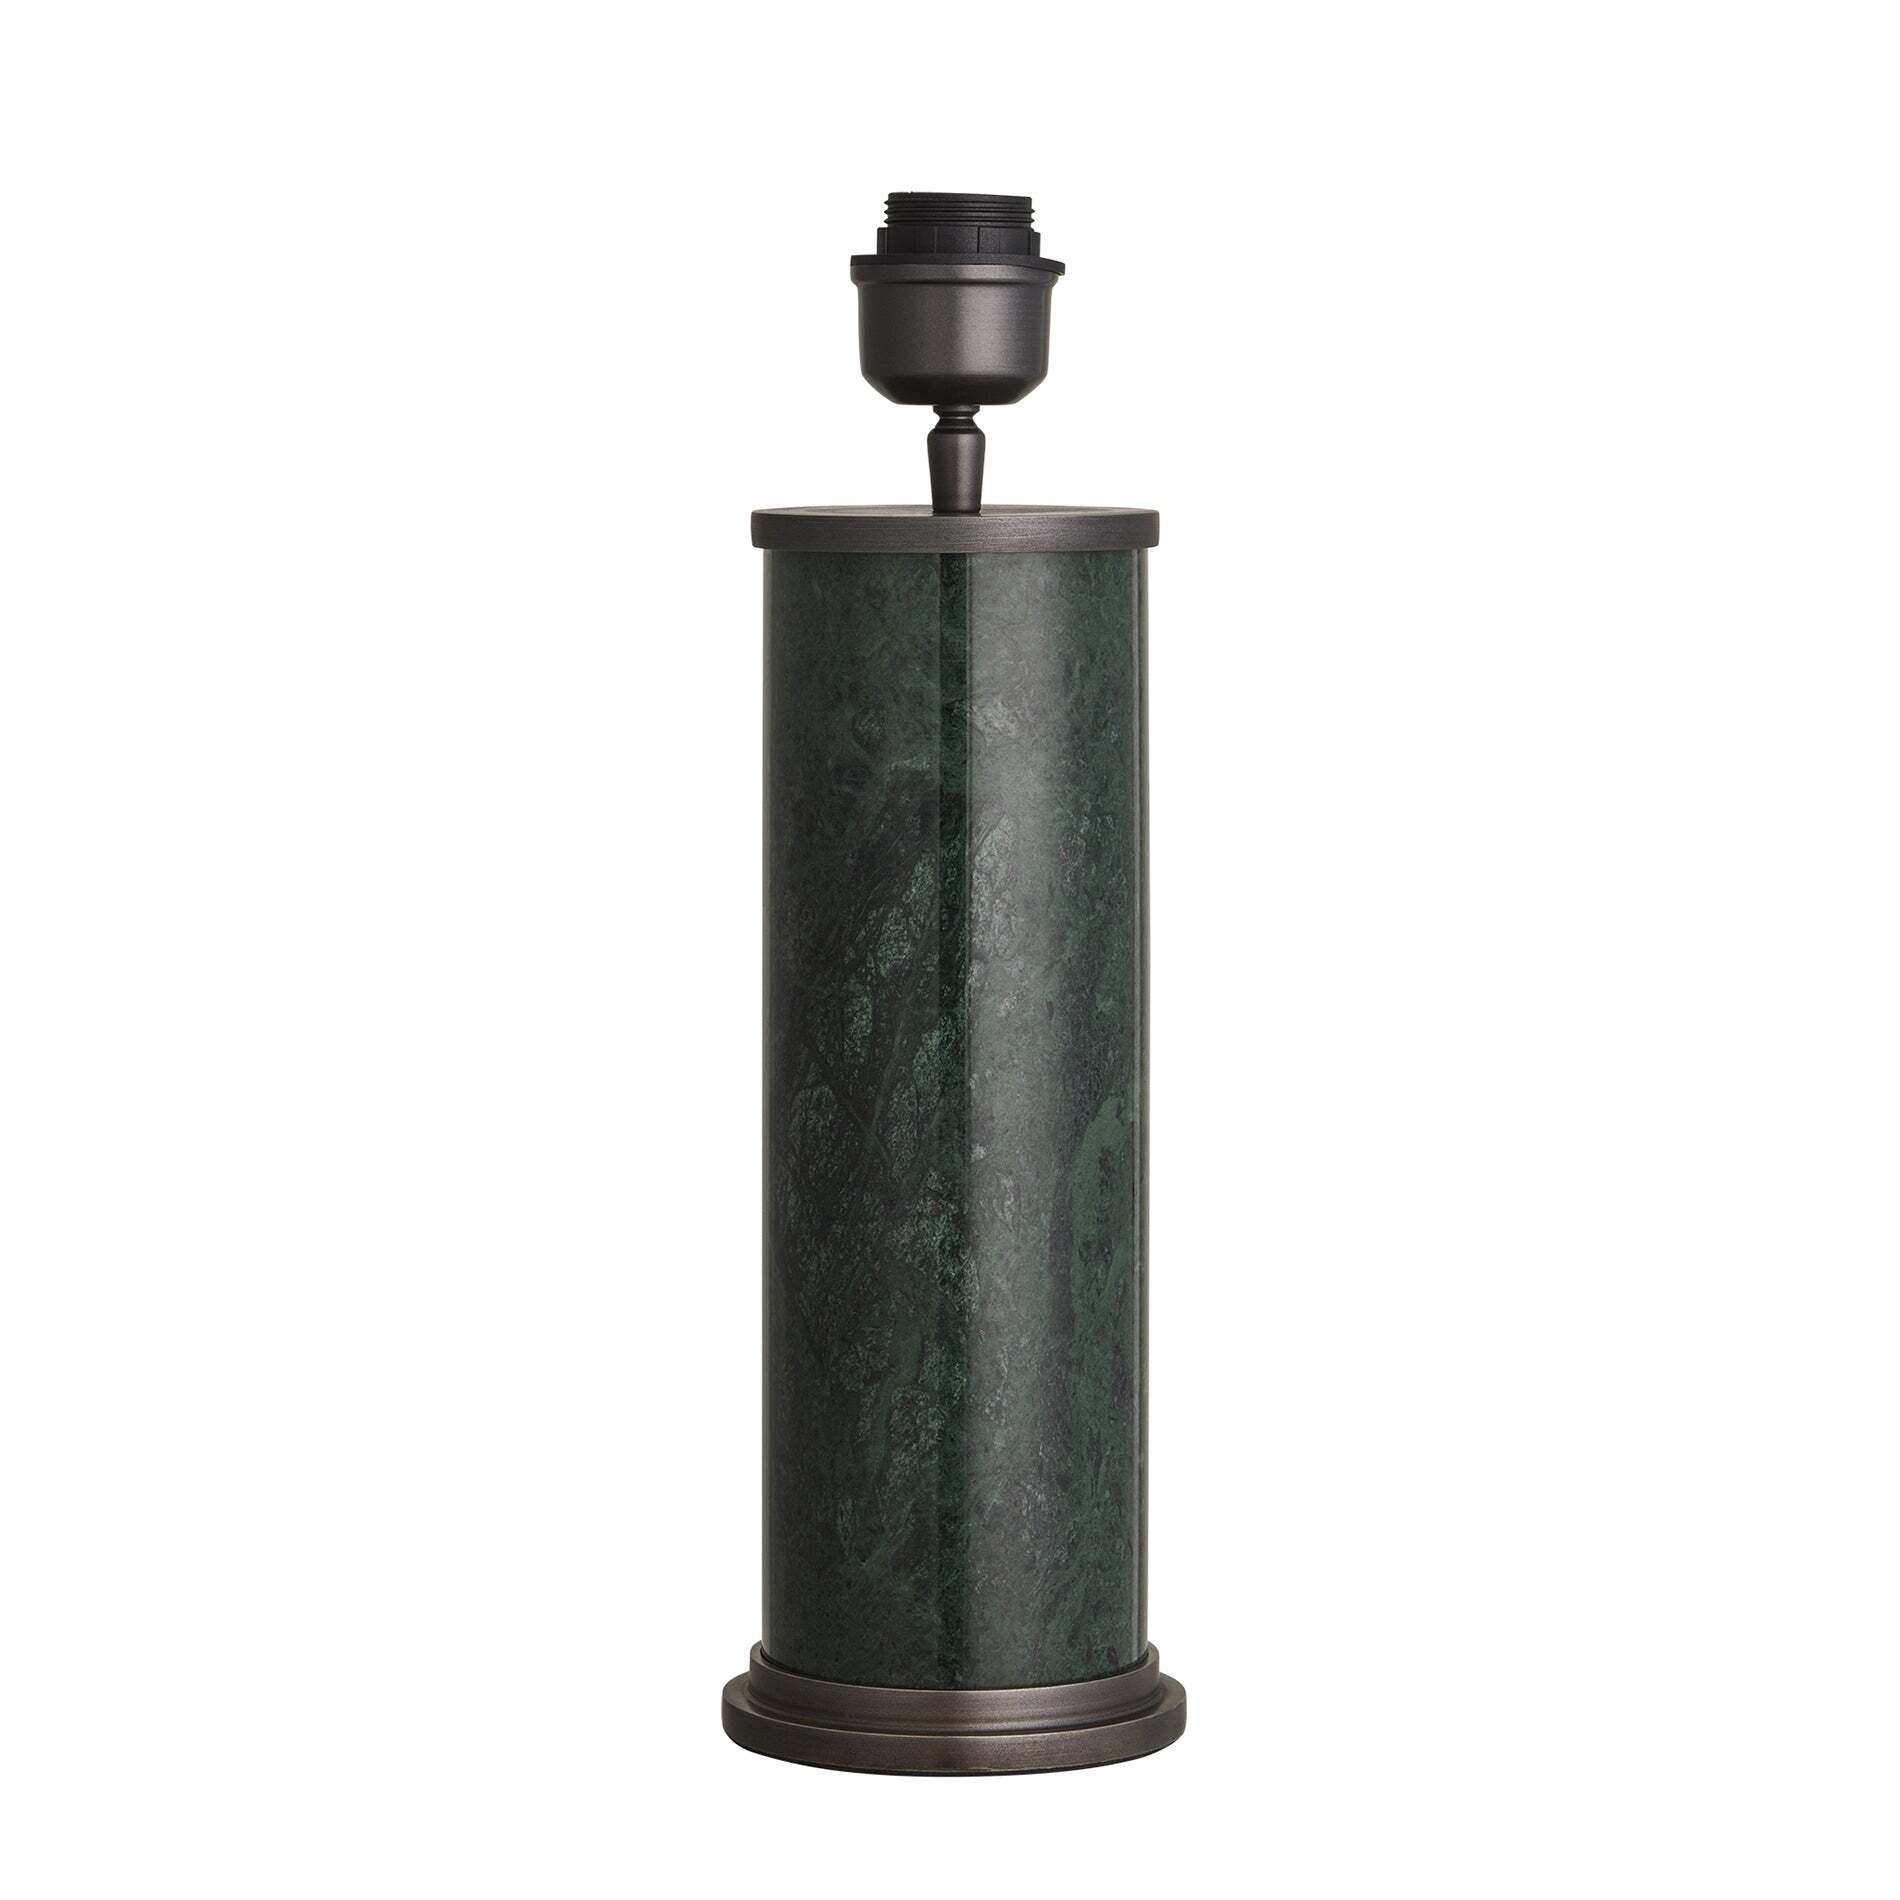 Marble Pillar Cylinder Table Lamp - Green & Pewter